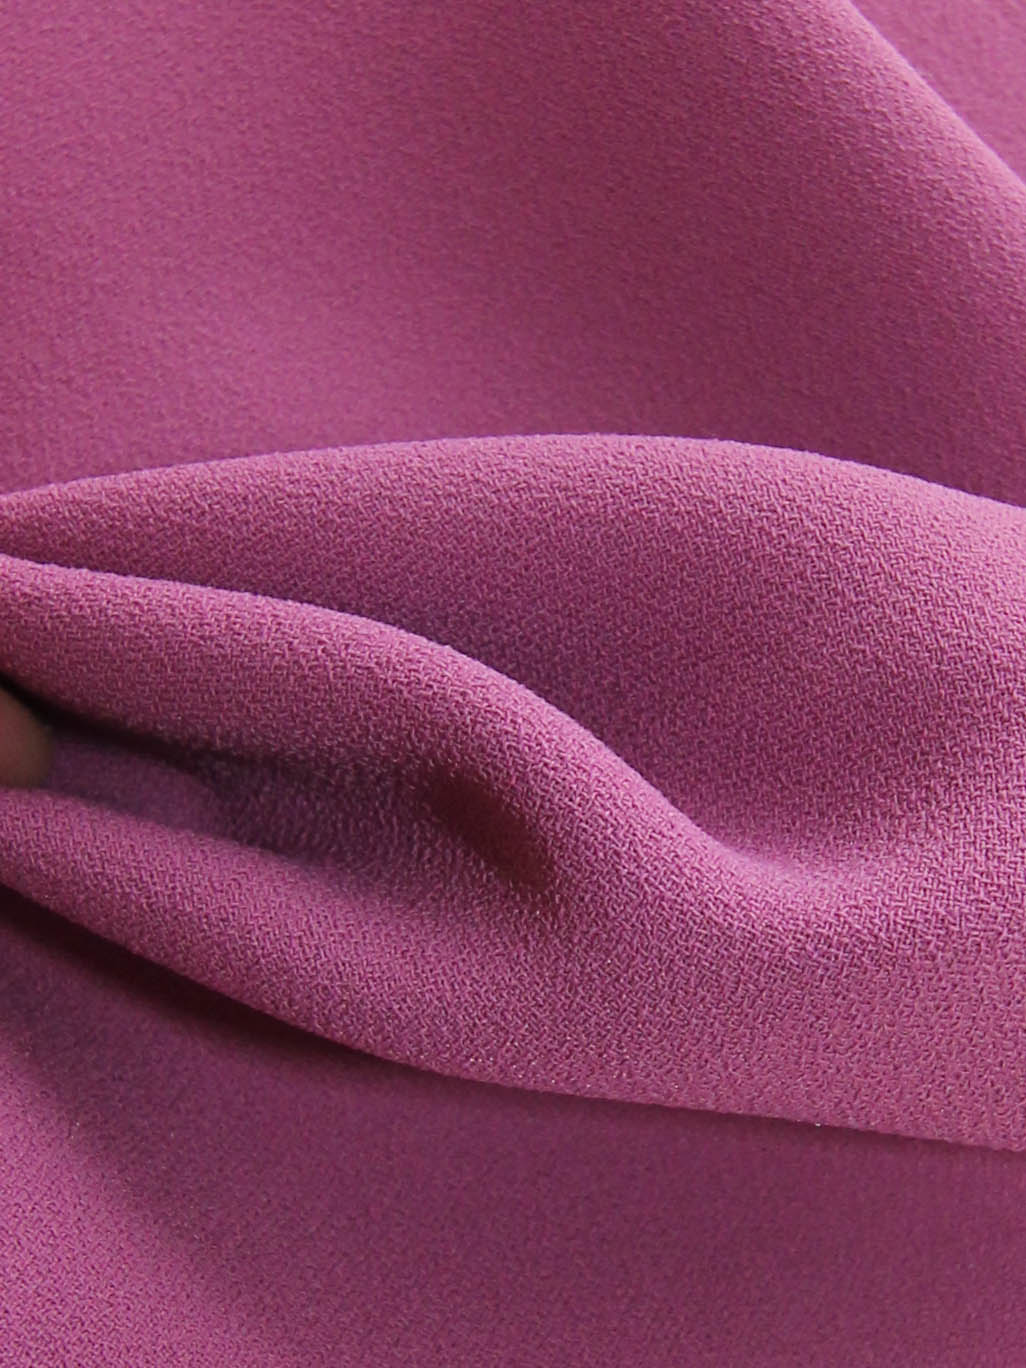 Clover Pink Polyester Crepe - Curiosity